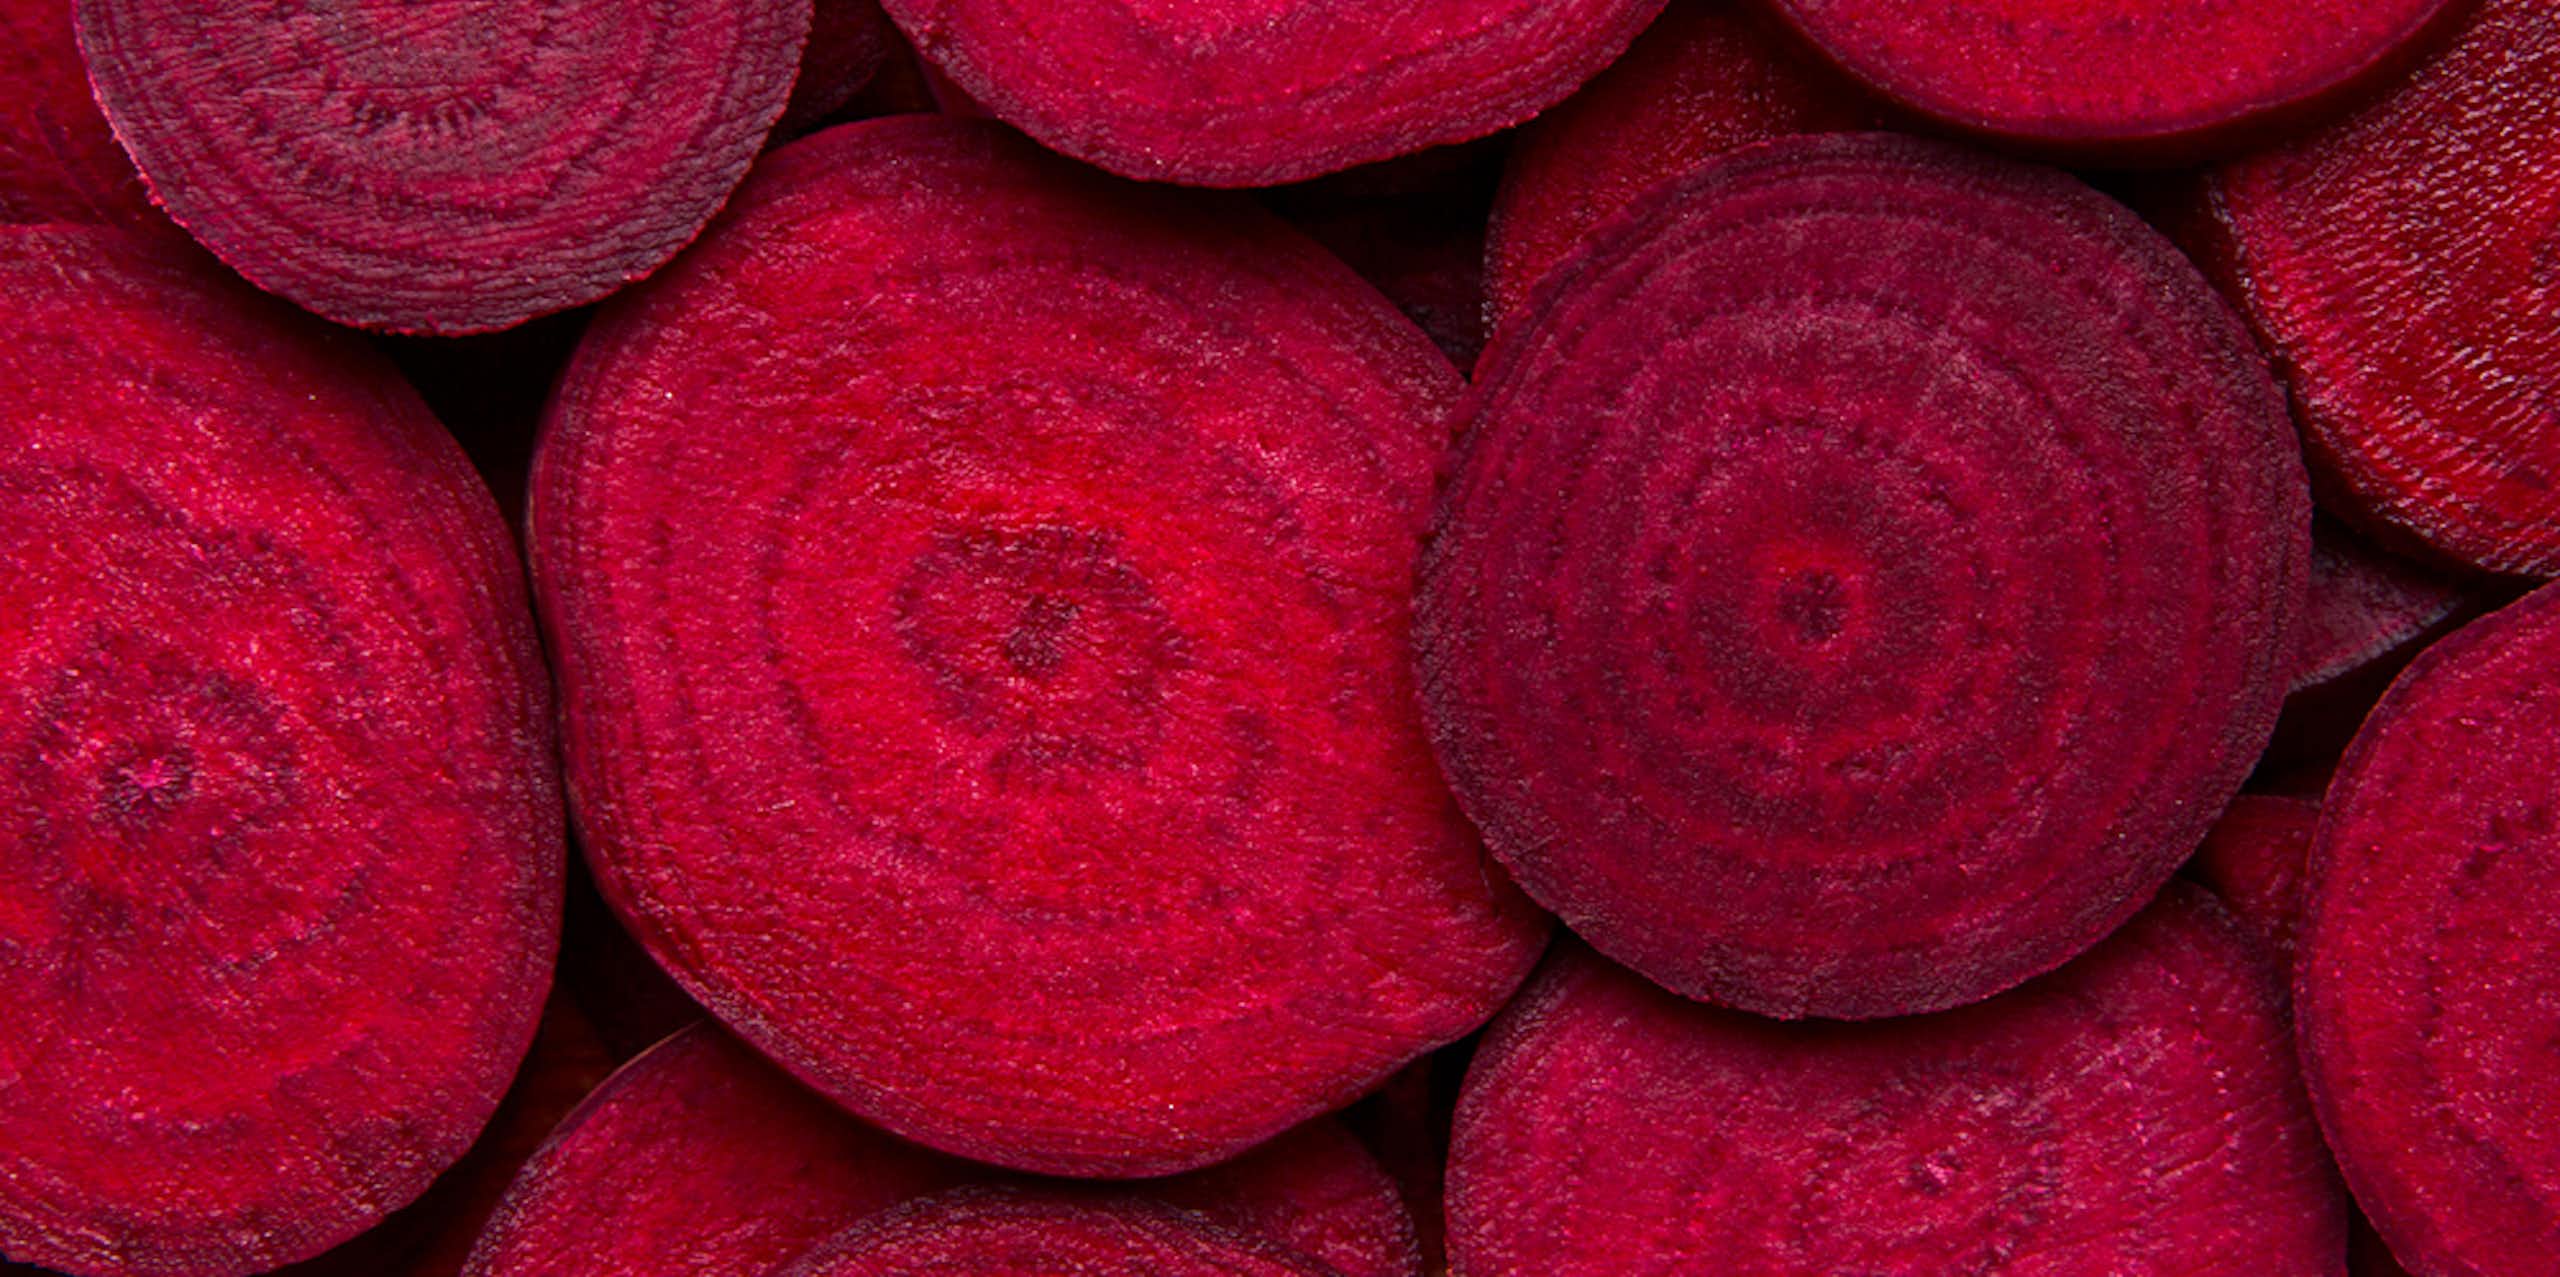 Beetroot slices arranged side by side